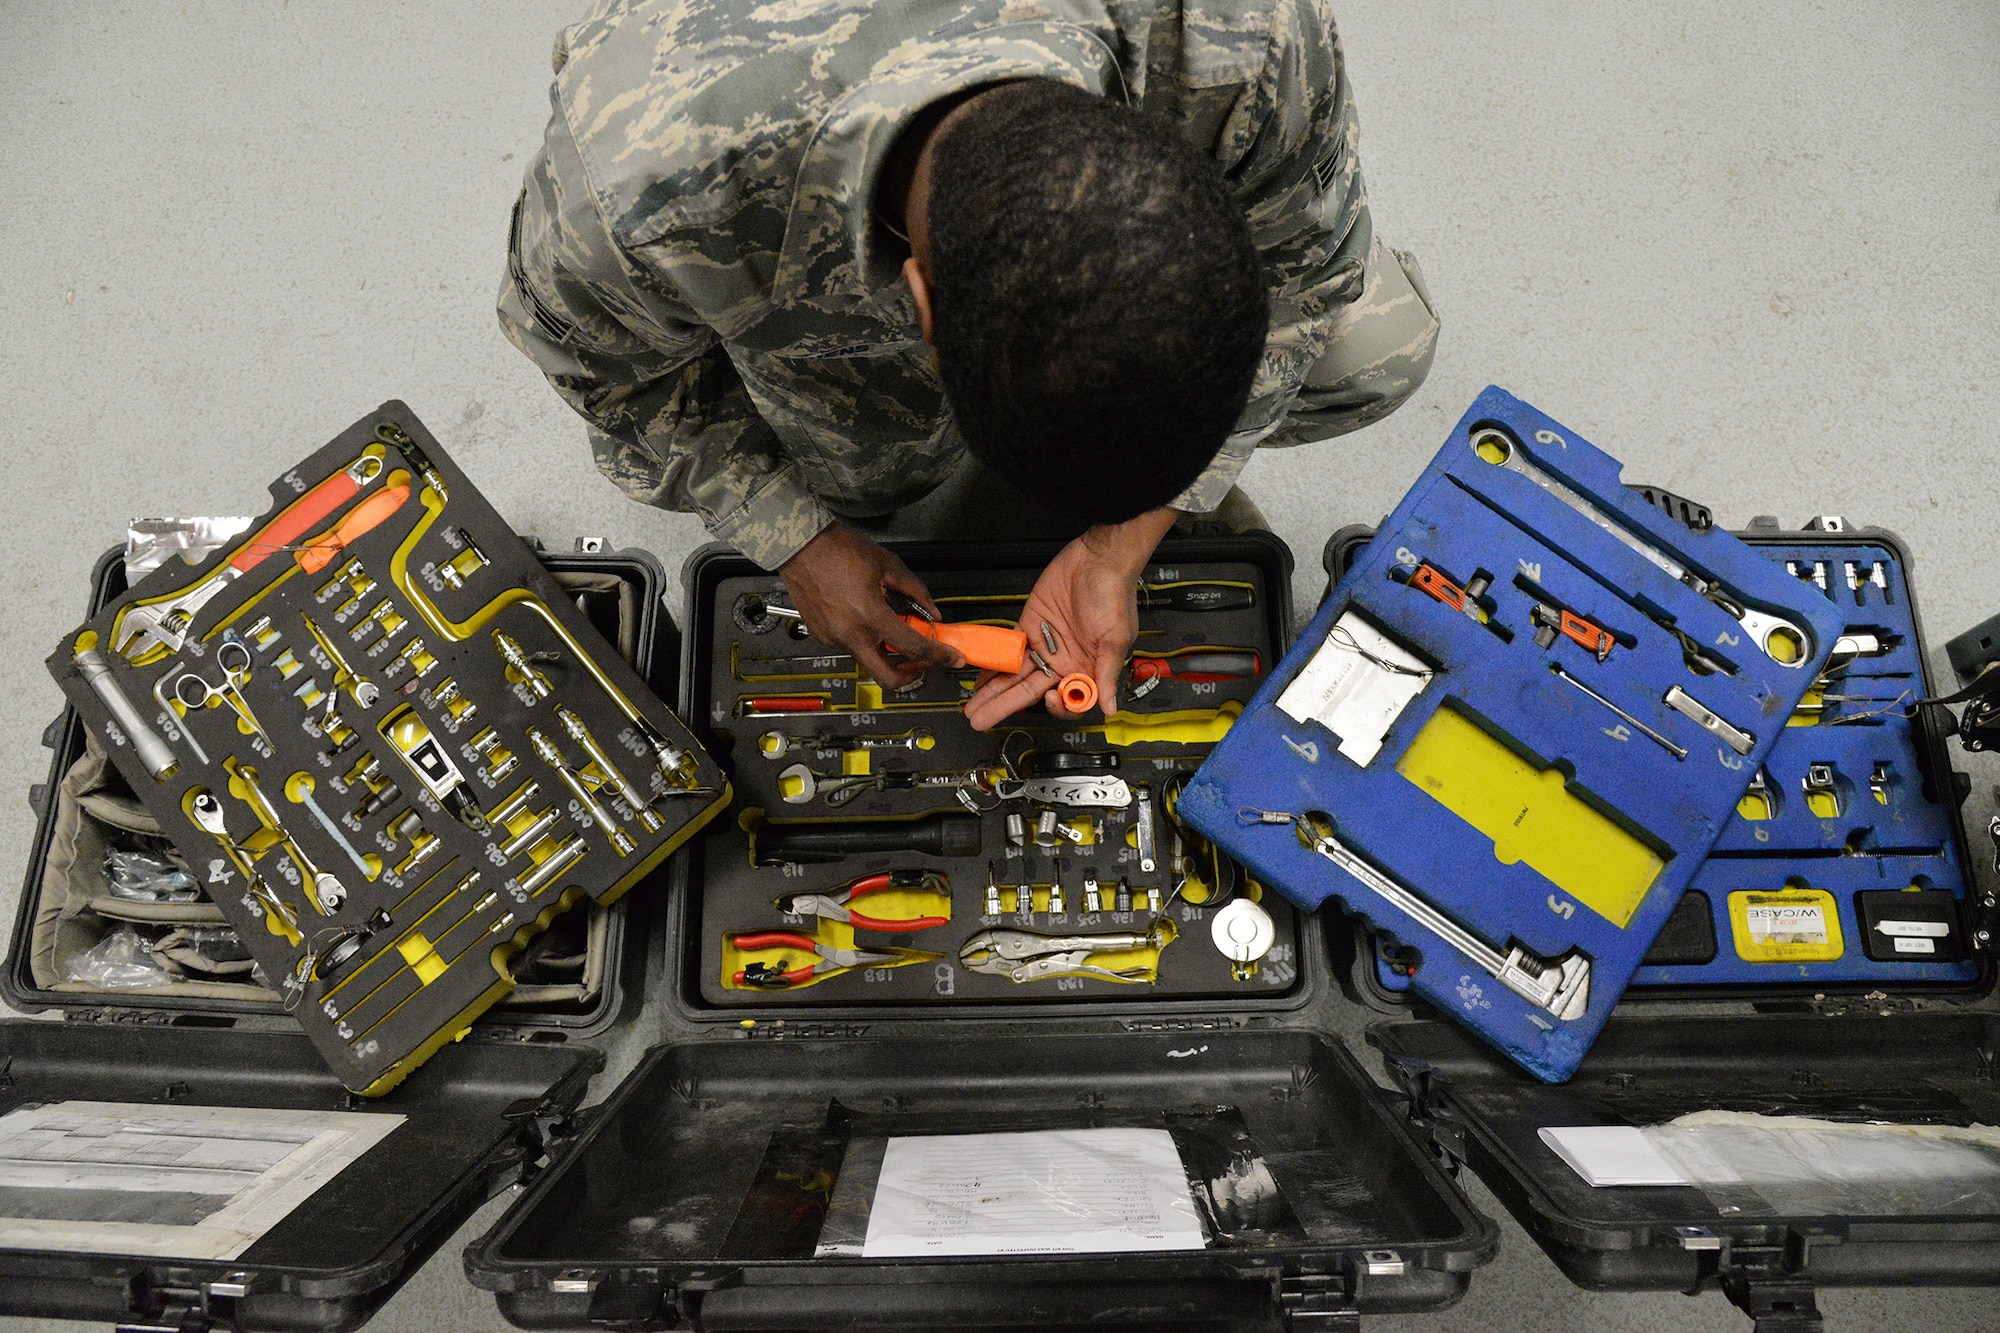 Senior Airman Shaquille Stephens, 341st Missile Maintenance Squadron maintenance technician, looks through kits of tools Jan. 17, 2017, at Malmstrom Air Force Base, Mont. Each day these kits are inspected to ensure maintenance Airmen have the necessary tools to execute their duties in the missile field. (U.S. Air Force photo/Airman 1st Class Daniel Brosam)